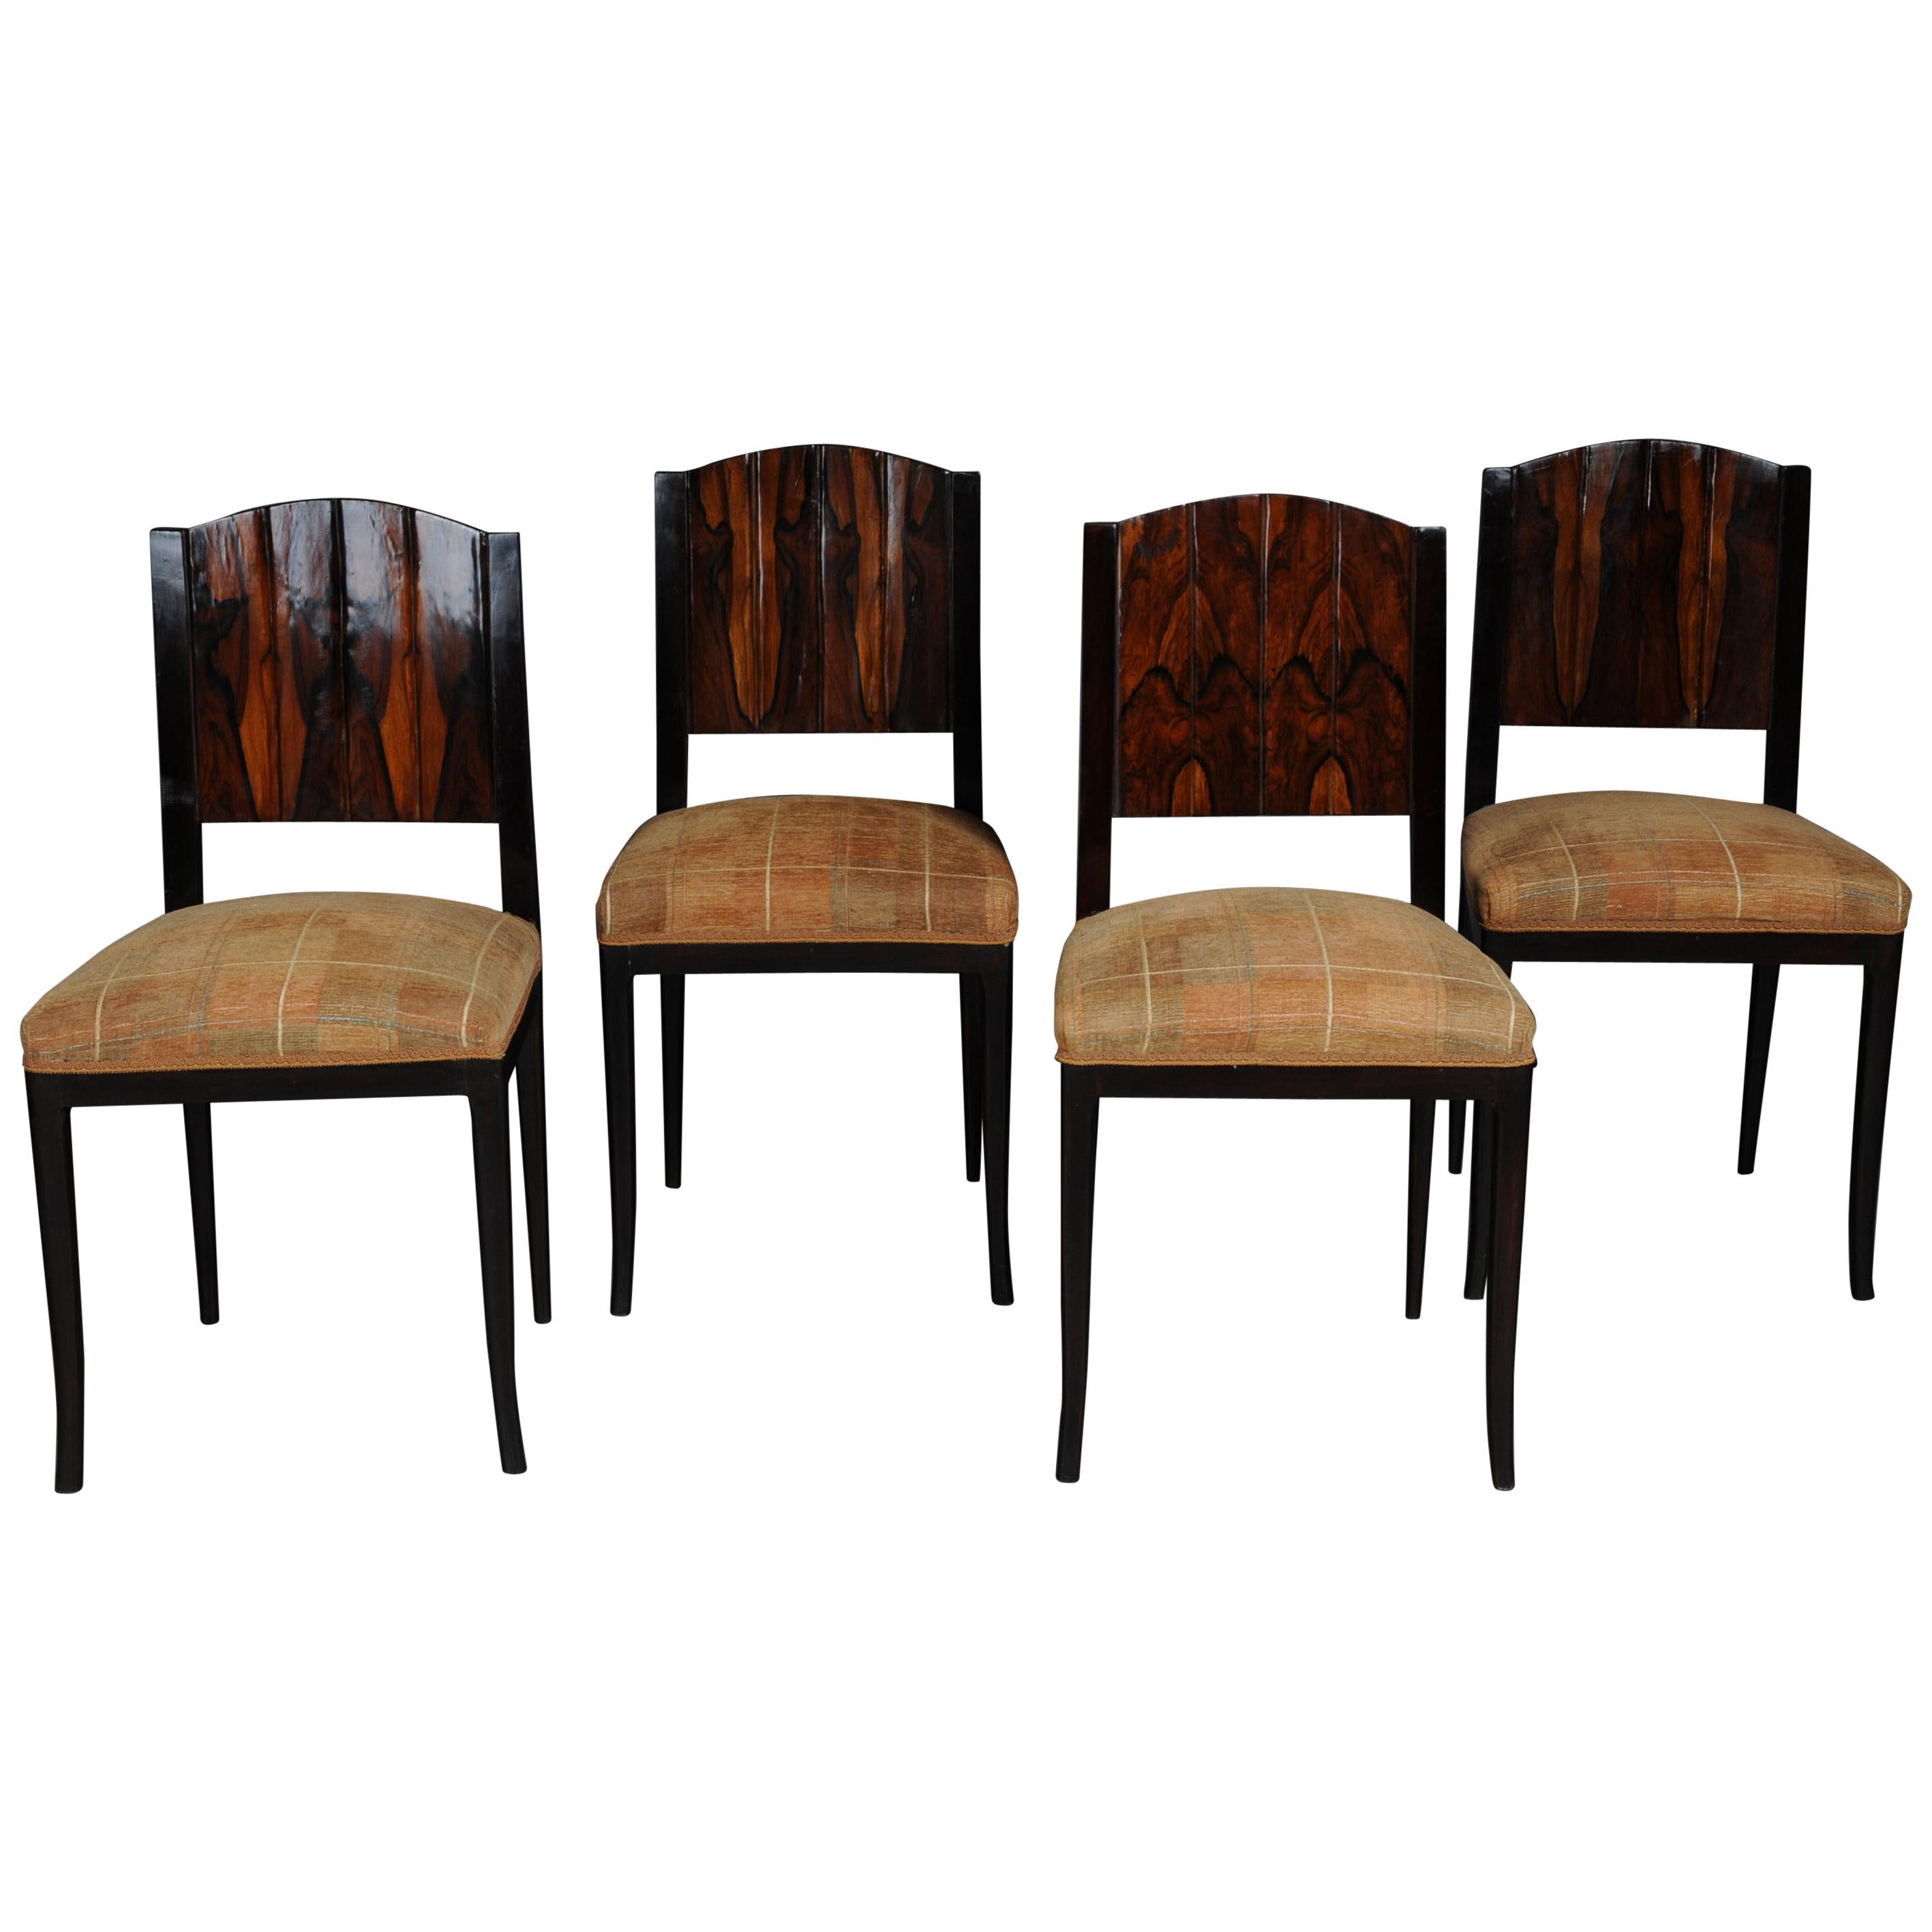 20th Century Classic Set of 4 Chairs in Art Deco Style For Sale